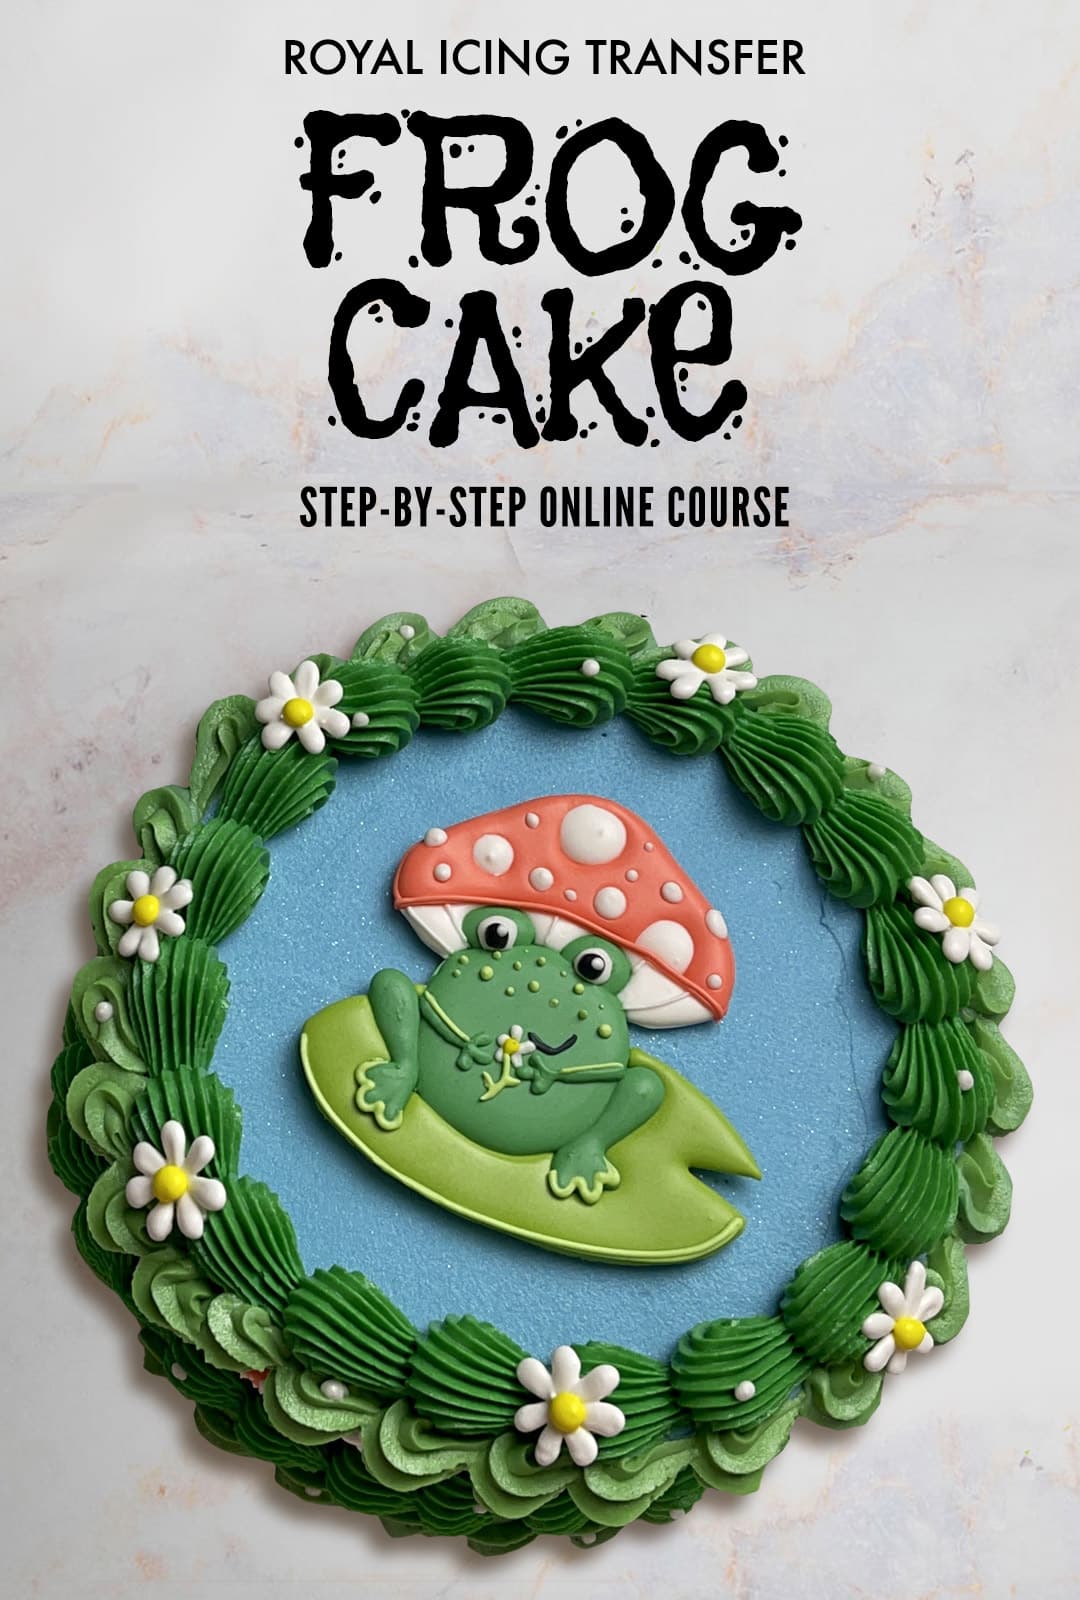 Cake with royal icing transfer of a frog on lily pad